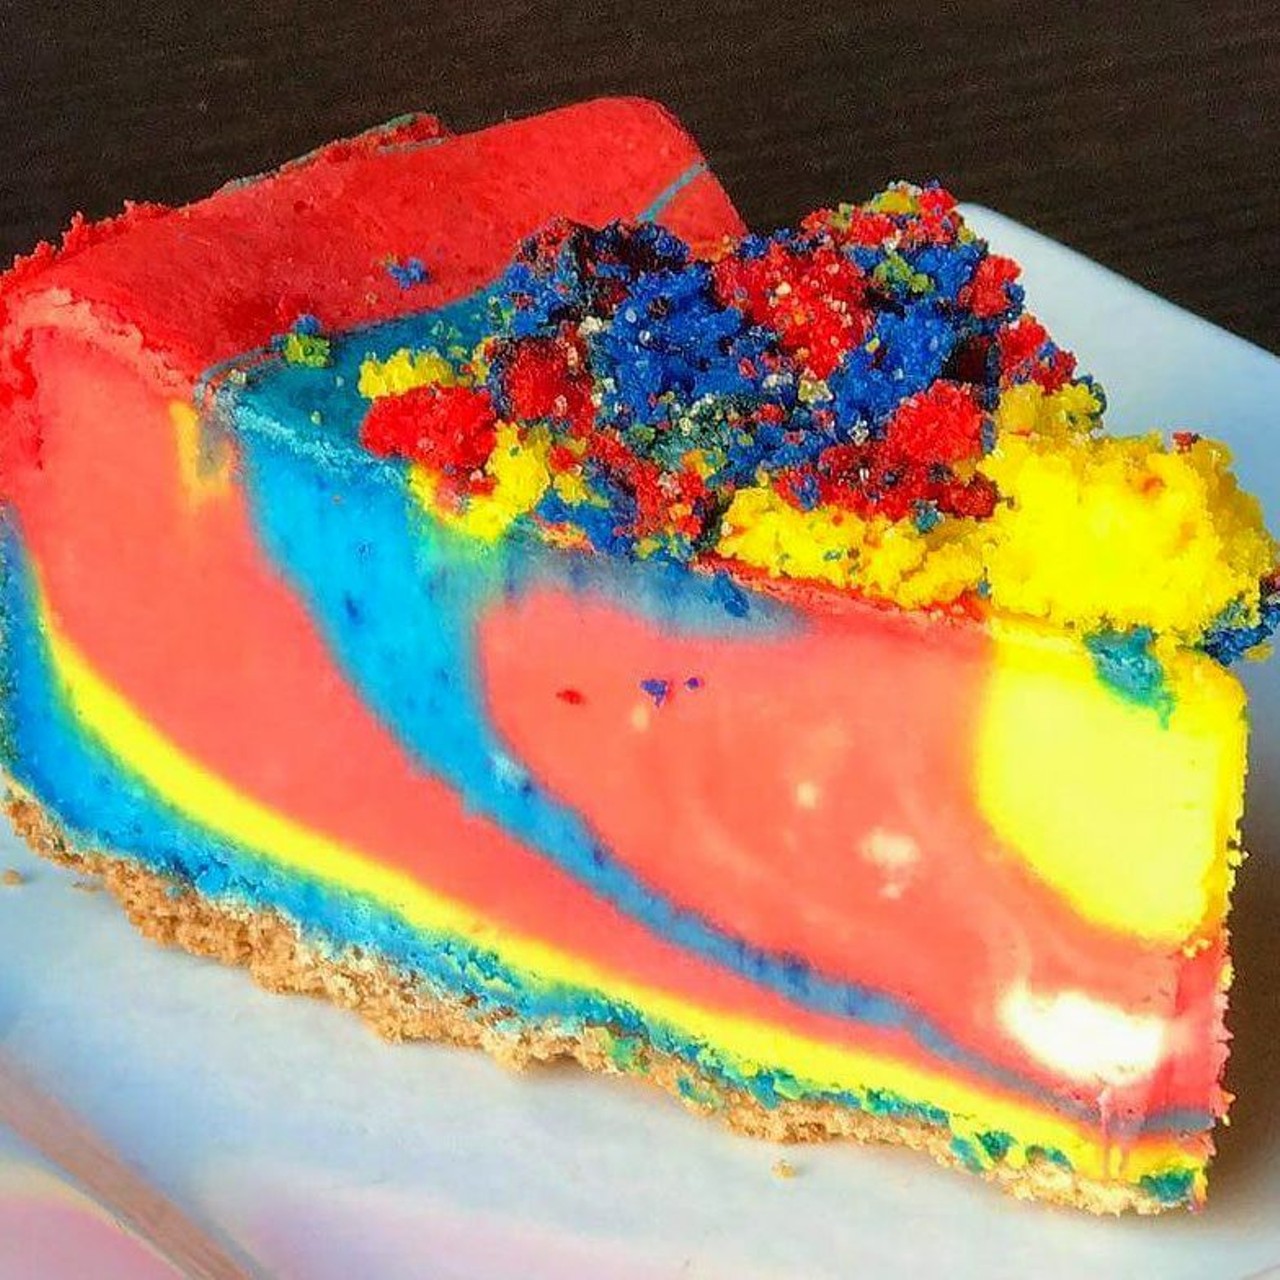 Superman Cheesecake
Kitty&#146;s Cheesecakes & More
681 E. Eight Mile Rd., Ferndale; 248-336-2253
kittyscheesecakes.com
Sometimes you want to feel like a kid and an adult. Sometimes you want to dream and live your life. Sometimes you want to eat a rainbow. With Kitty&#146;s Superman Cheesecake, you can do all of this. Live your dreams and taste the rainbow. 
Photo from Kitty&#146;s Cheesecakes & More / Facebook